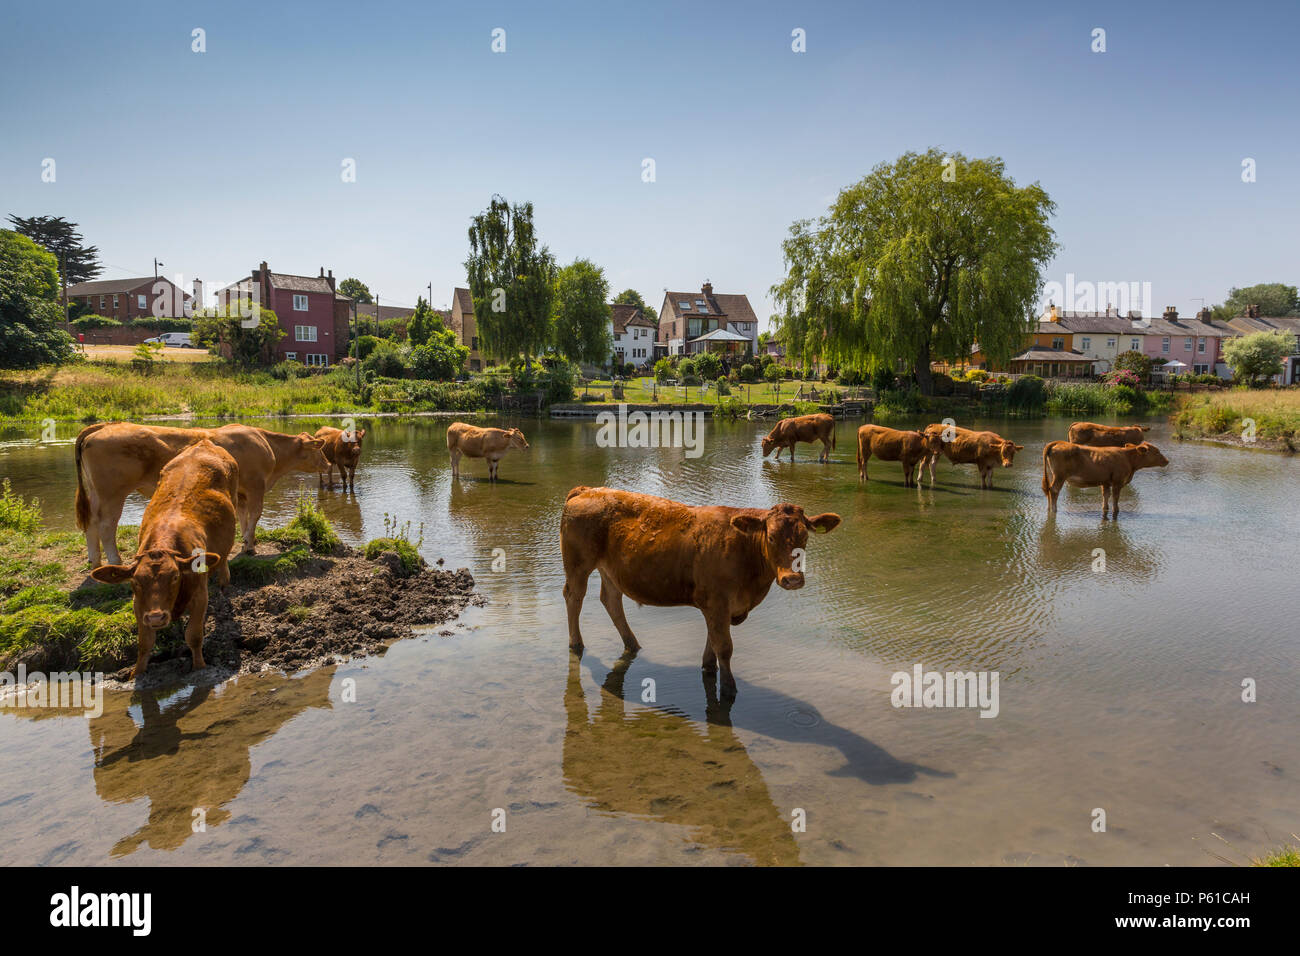 Sudbury, Suffolk, UK. 28th June 2018. UK weather - cattle cooling themselves at The River Stour, Suffolk. Stock Photo